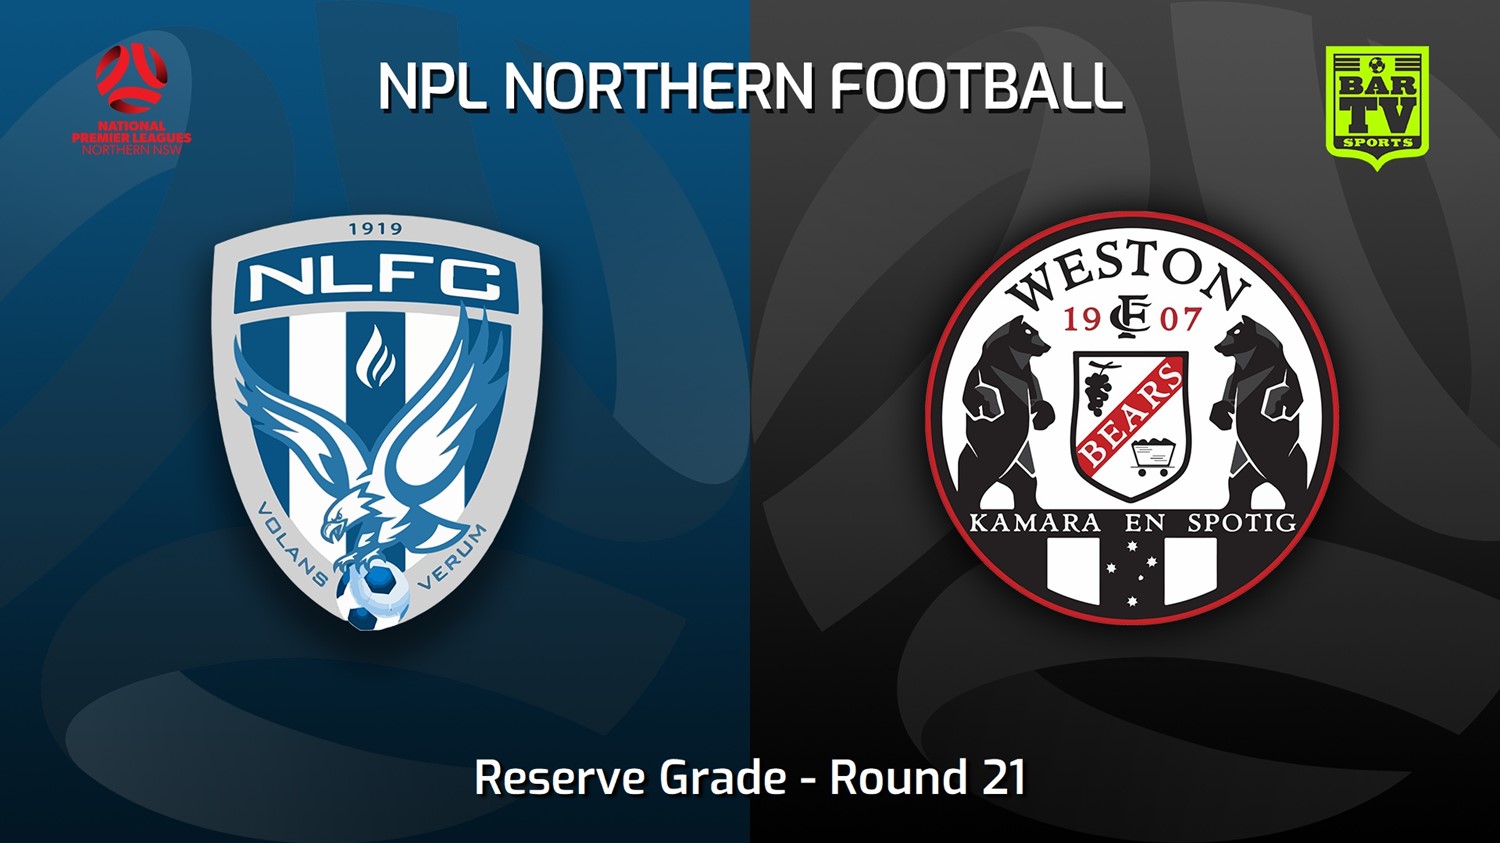 230805-NNSW NPLM Res Round 21 - New Lambton FC (Res) v Weston Workers FC Res Minigame Slate Image